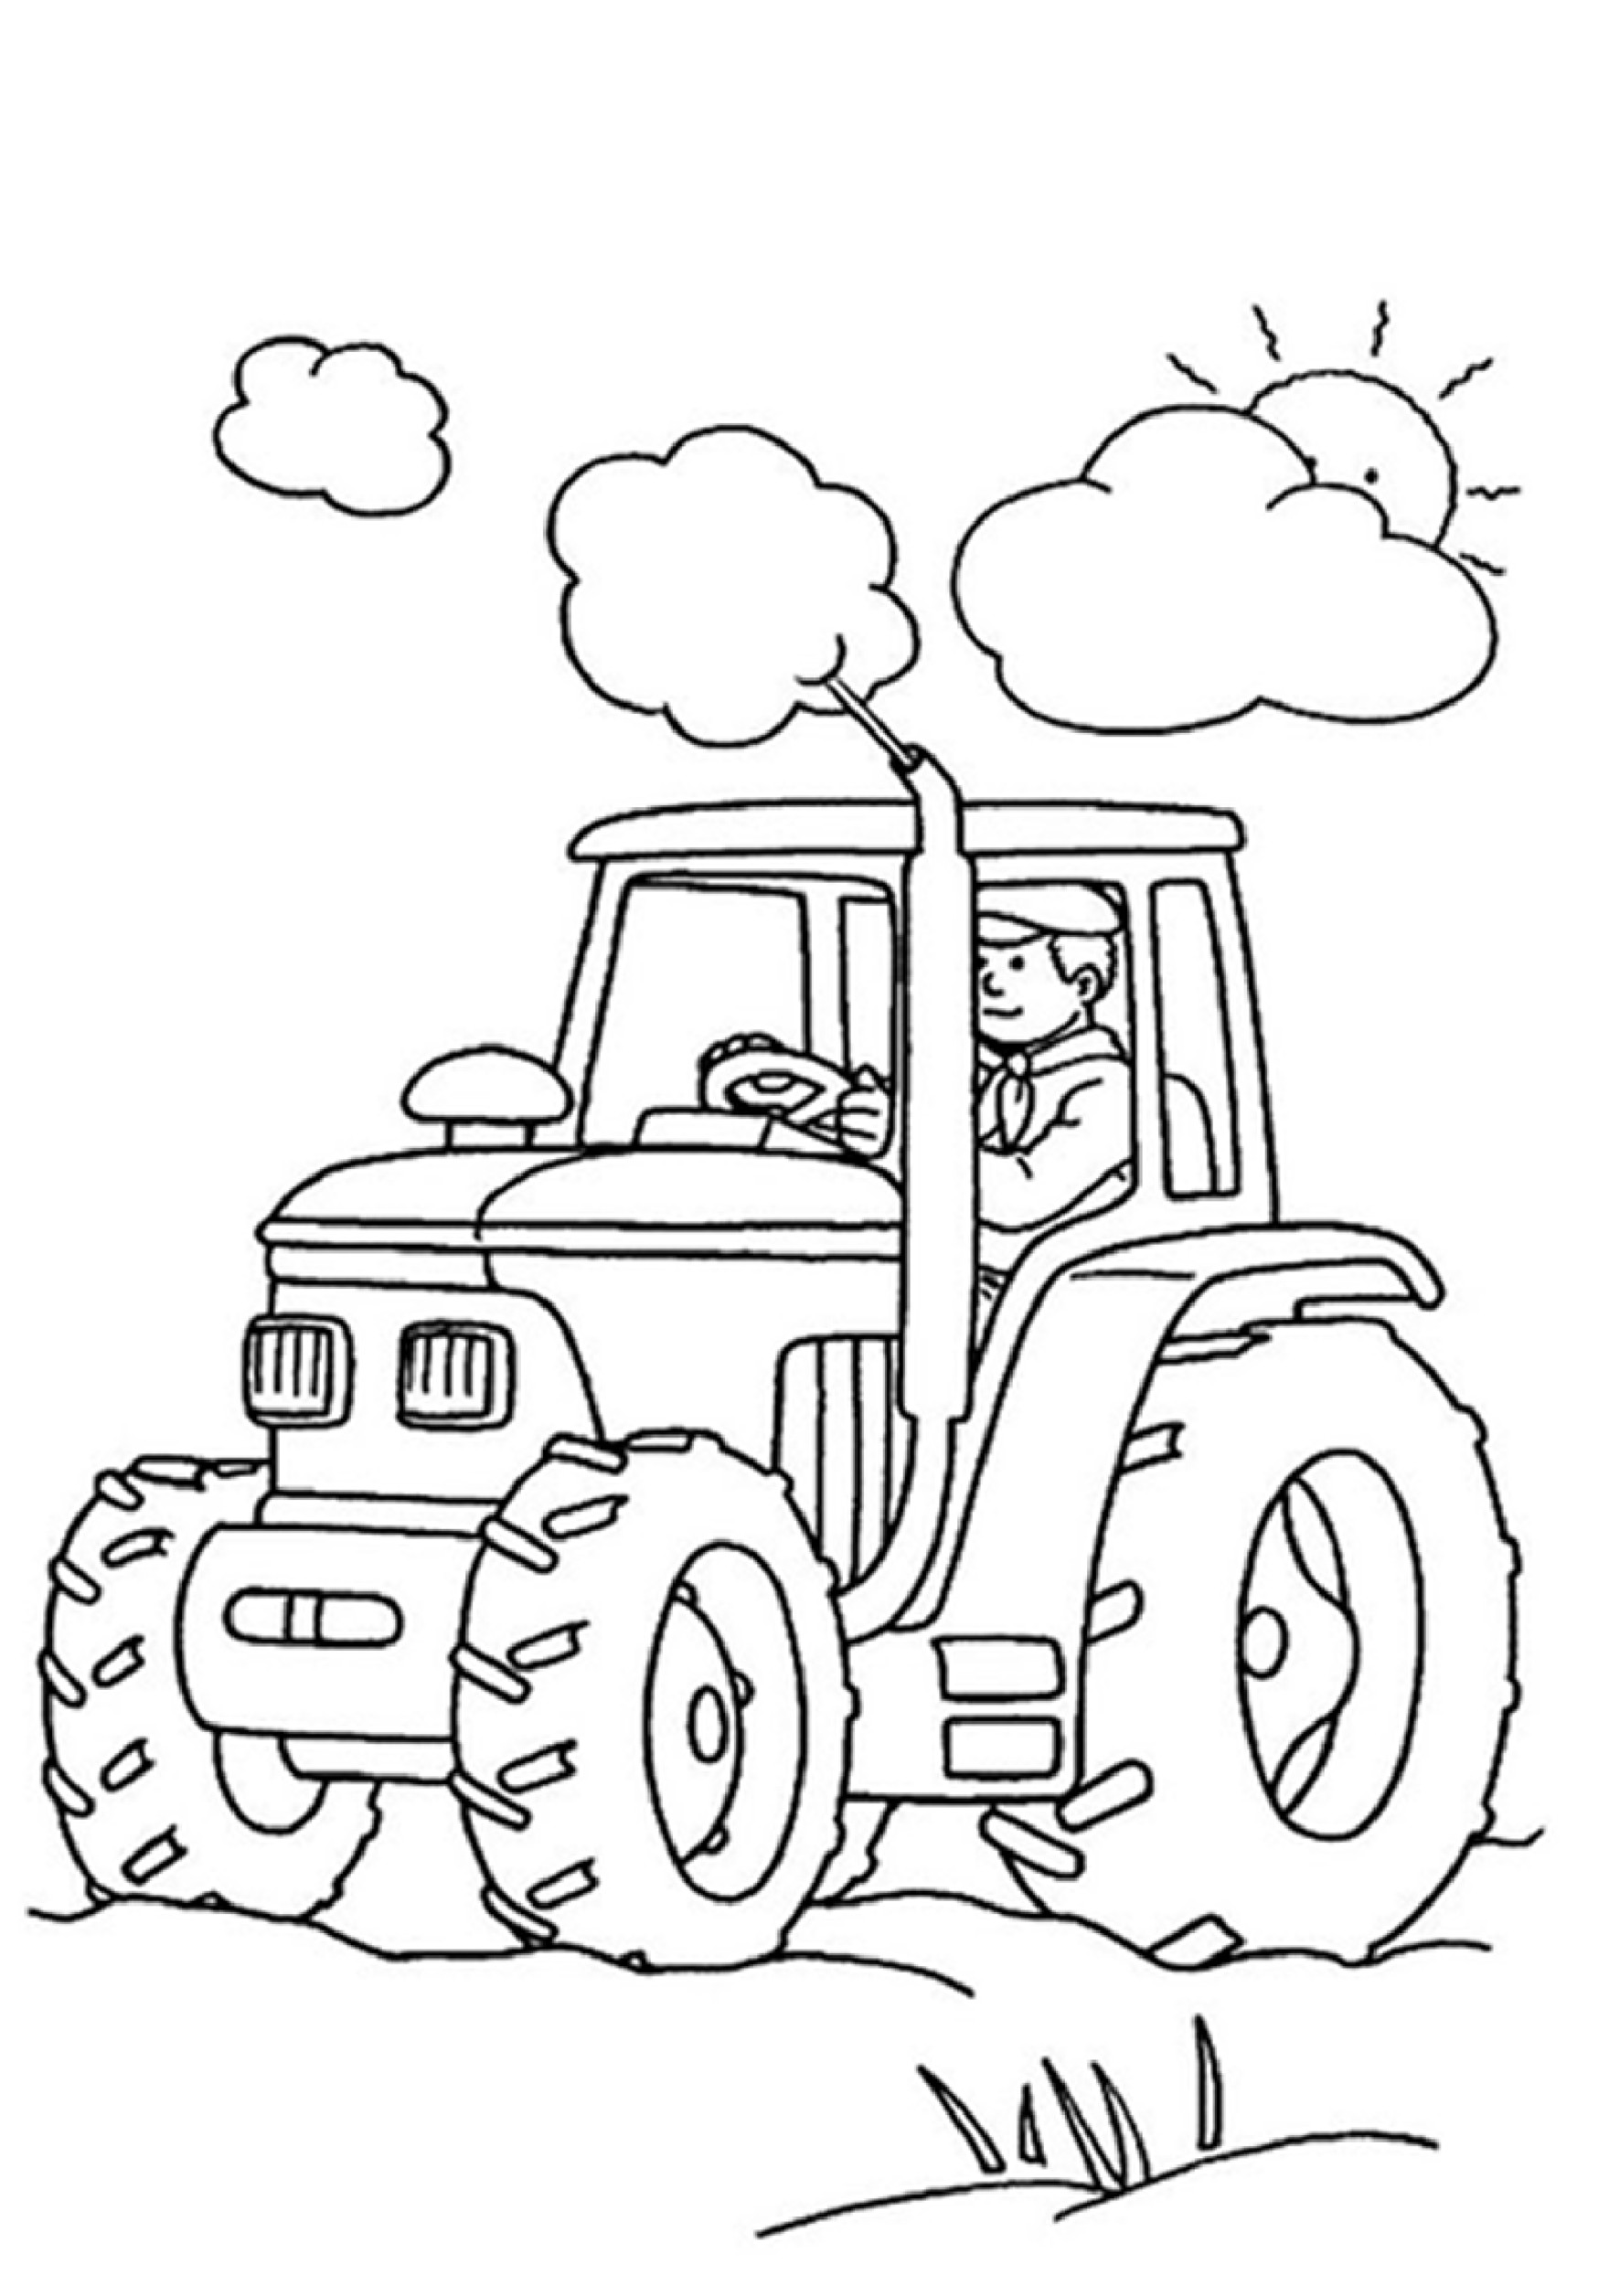 Printable Coloring Sheets For Boys
 Coloring Town